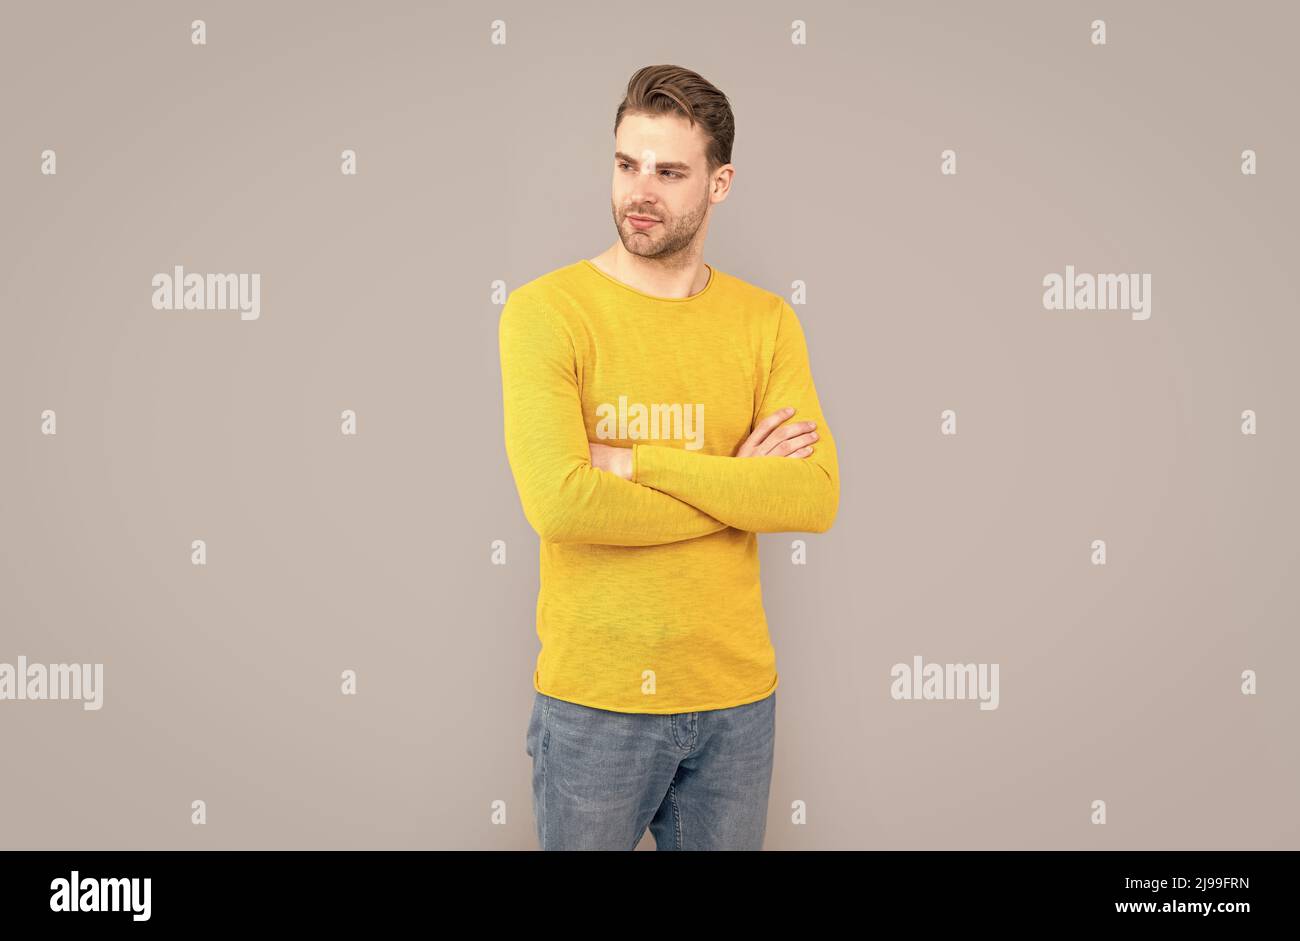 Put on confidence. Confident man grey background. Fashion man keep arms crossed Stock Photo